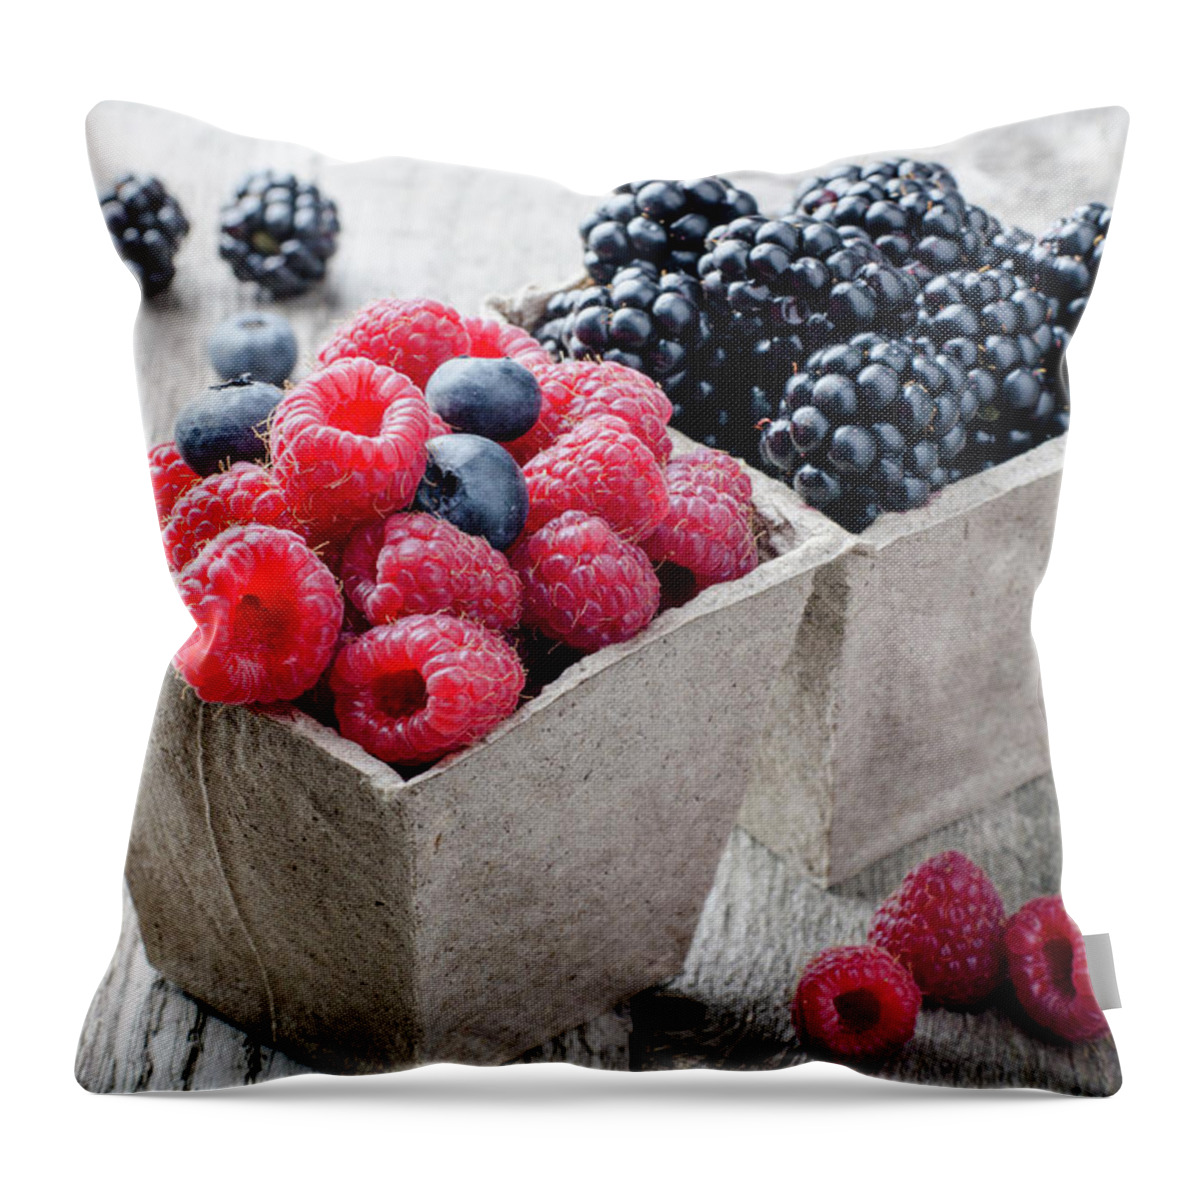 Black Color Throw Pillow featuring the photograph Raspberries And Blackberries In Boxes by Olena Gorbenko Delicious Food